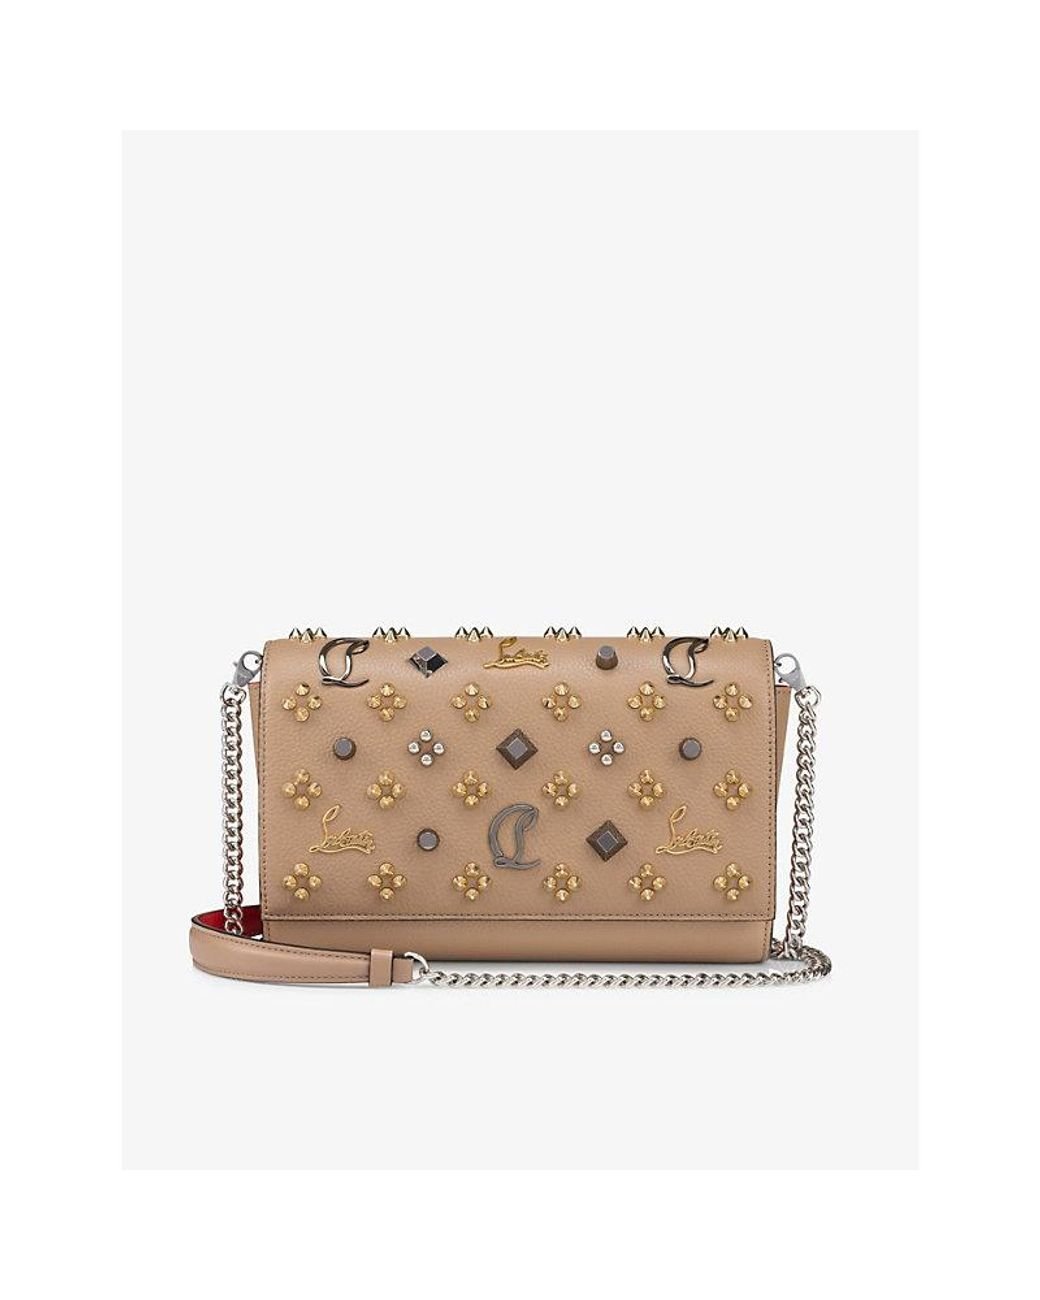 Christian Louboutin Paloma Leather Clutch Bag in Natural